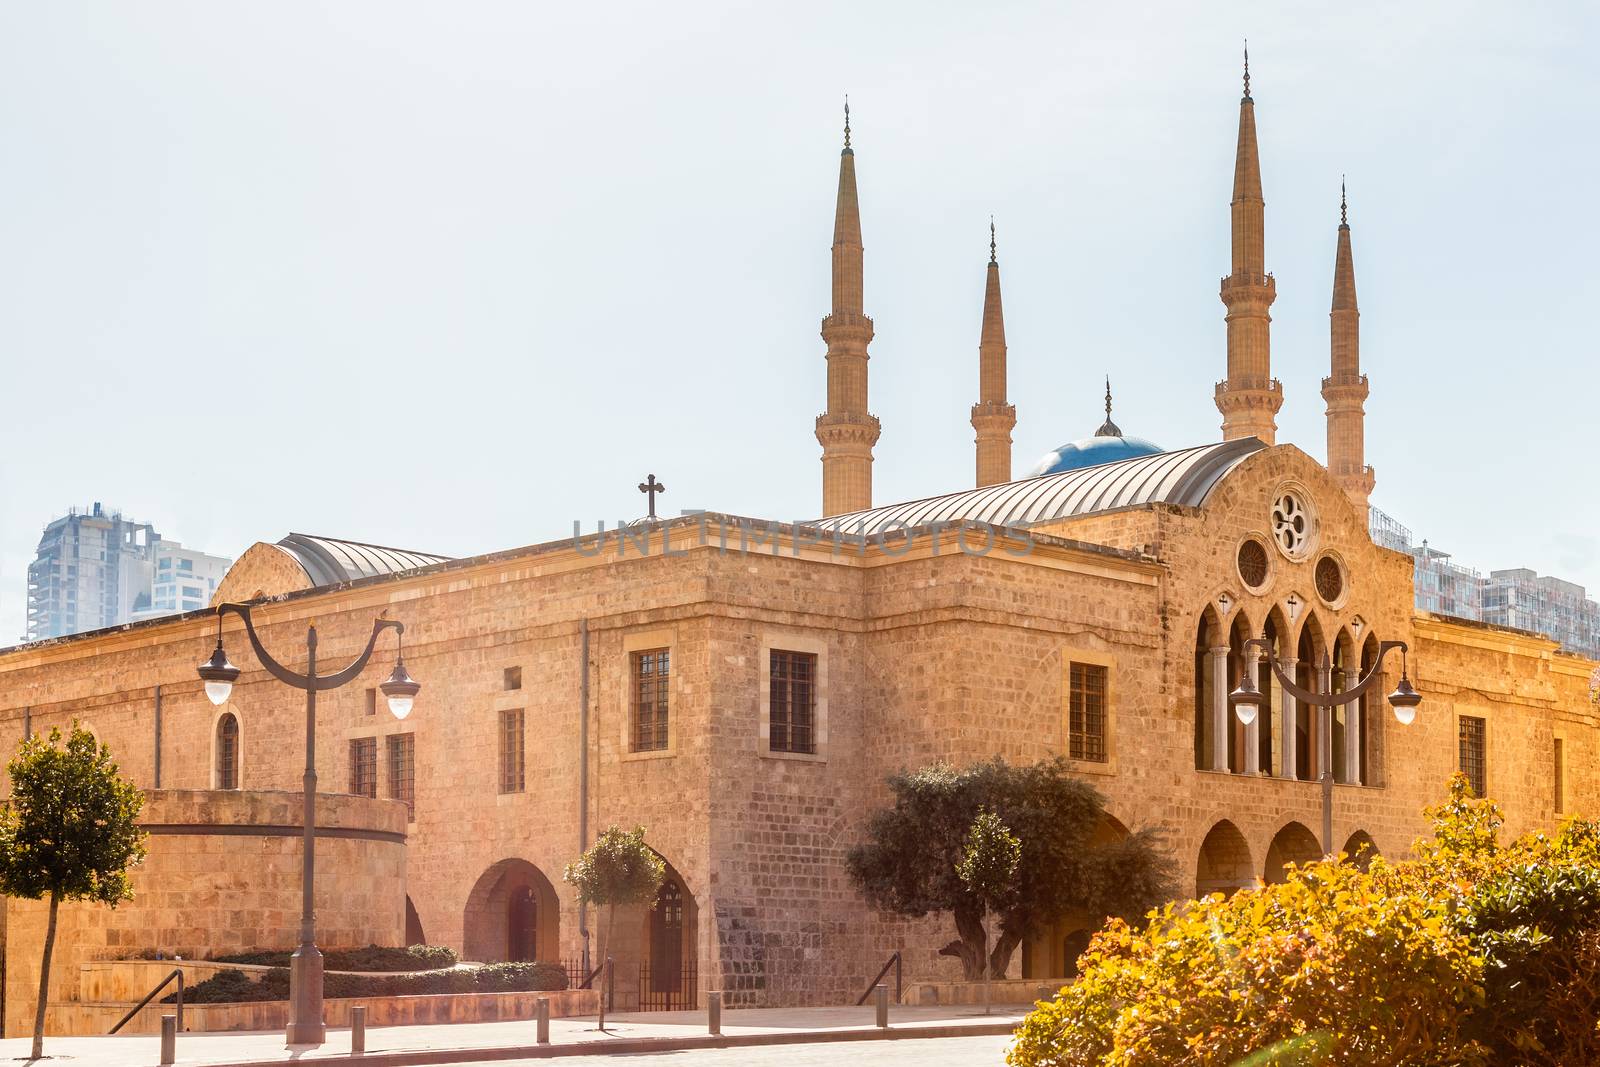 Saint Georges Maronite cathedral and Mohammad Al-Amin Mosque in  by ambeon